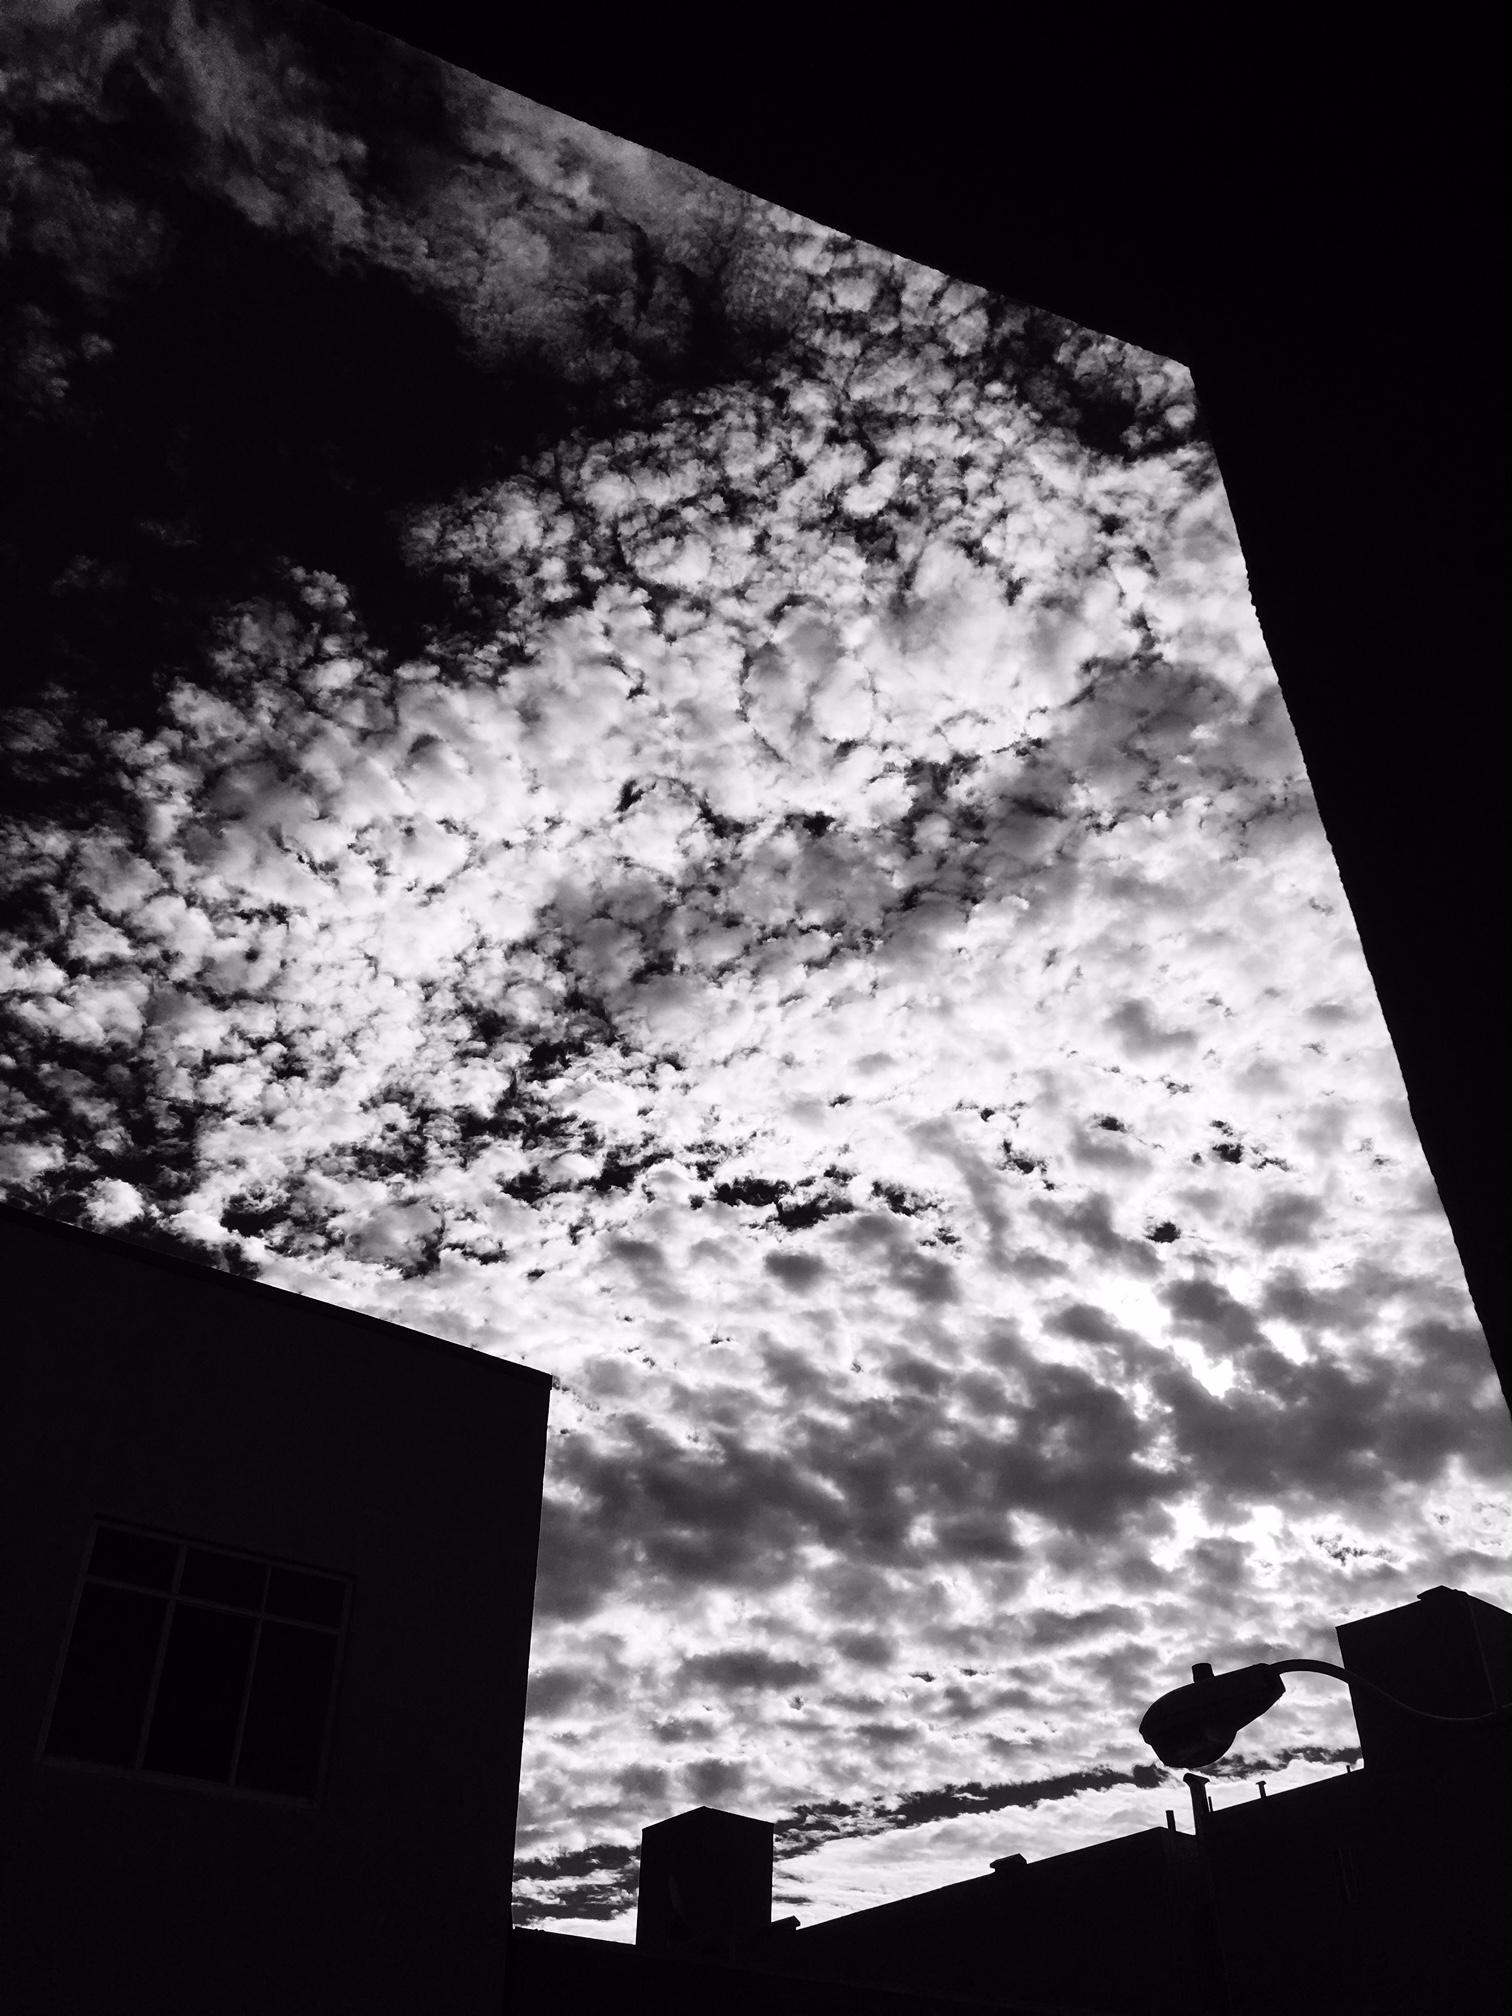 San Francisco
#inthesky 
22”x17” photographic prints on archival paper
Each limited to an edition of 7
$900 (unframed) / $1175 (framed)
#inthesky
A mobile photography essay that began in 2015. This ongoing international series, intending to capture